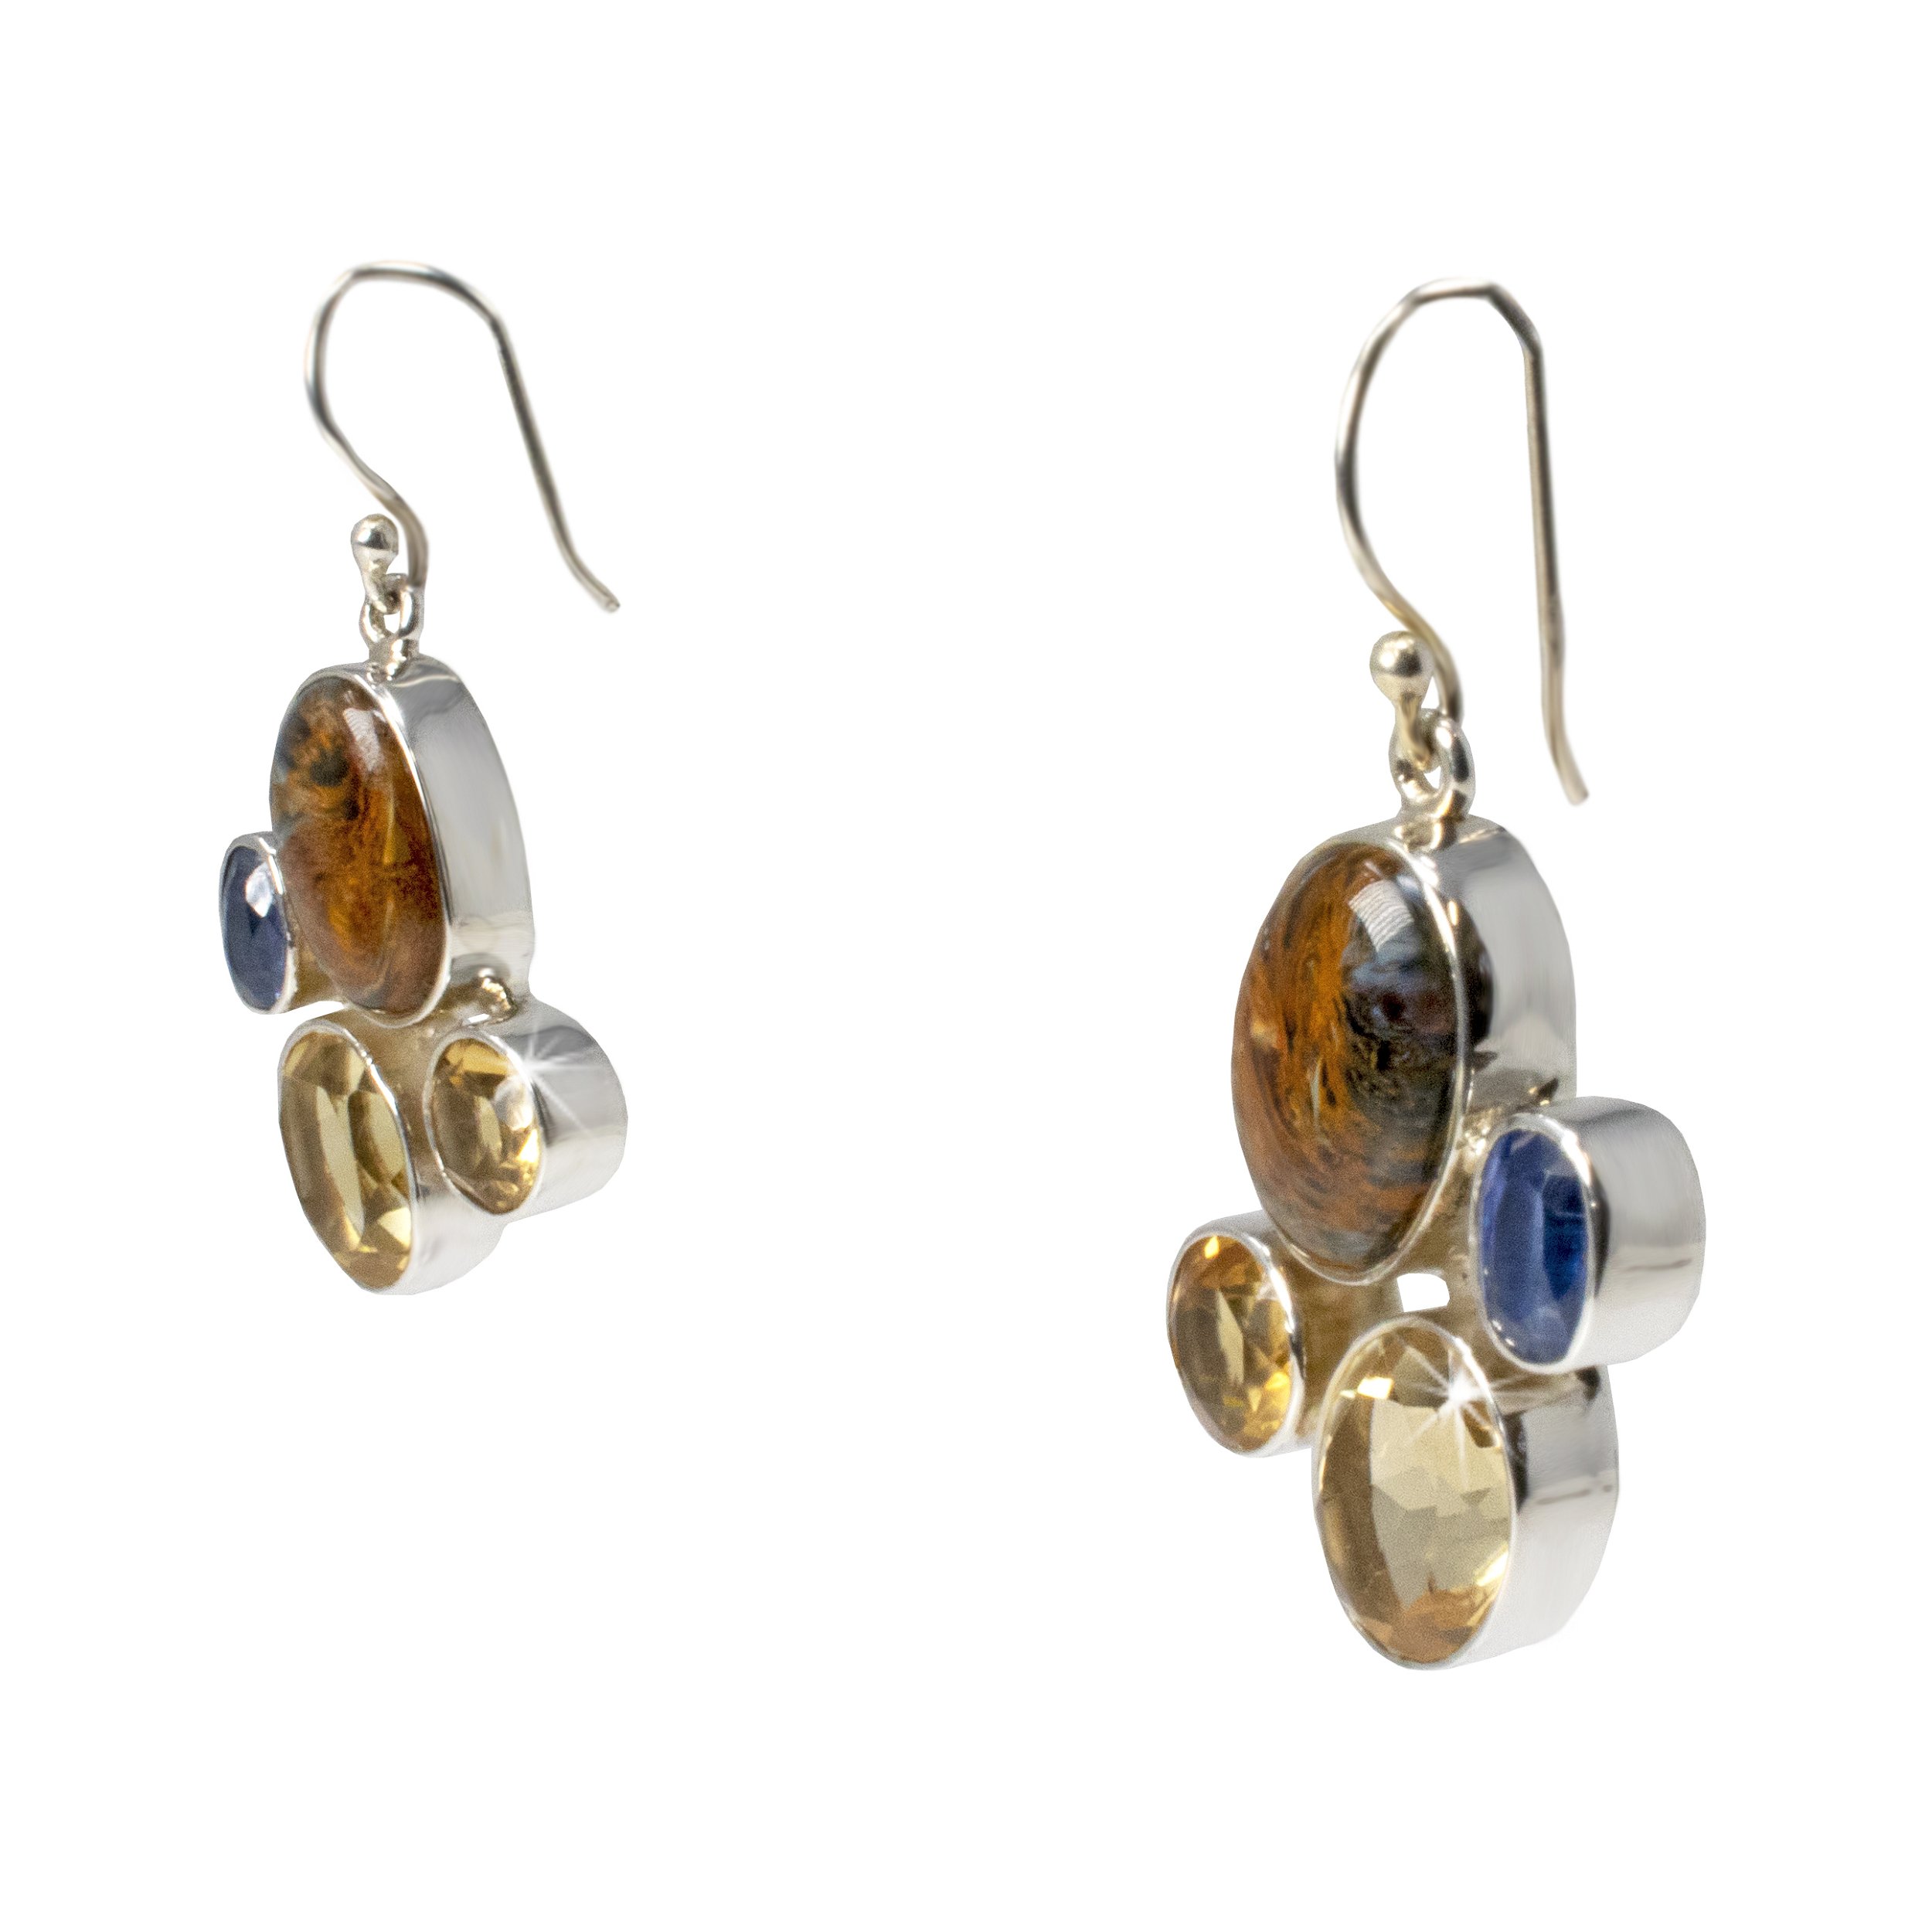 Pietersite Dangle Earrings - Oval Cabochon With Faceted Citrine Ovals & Rounds With Faceted Kyanite Ovals